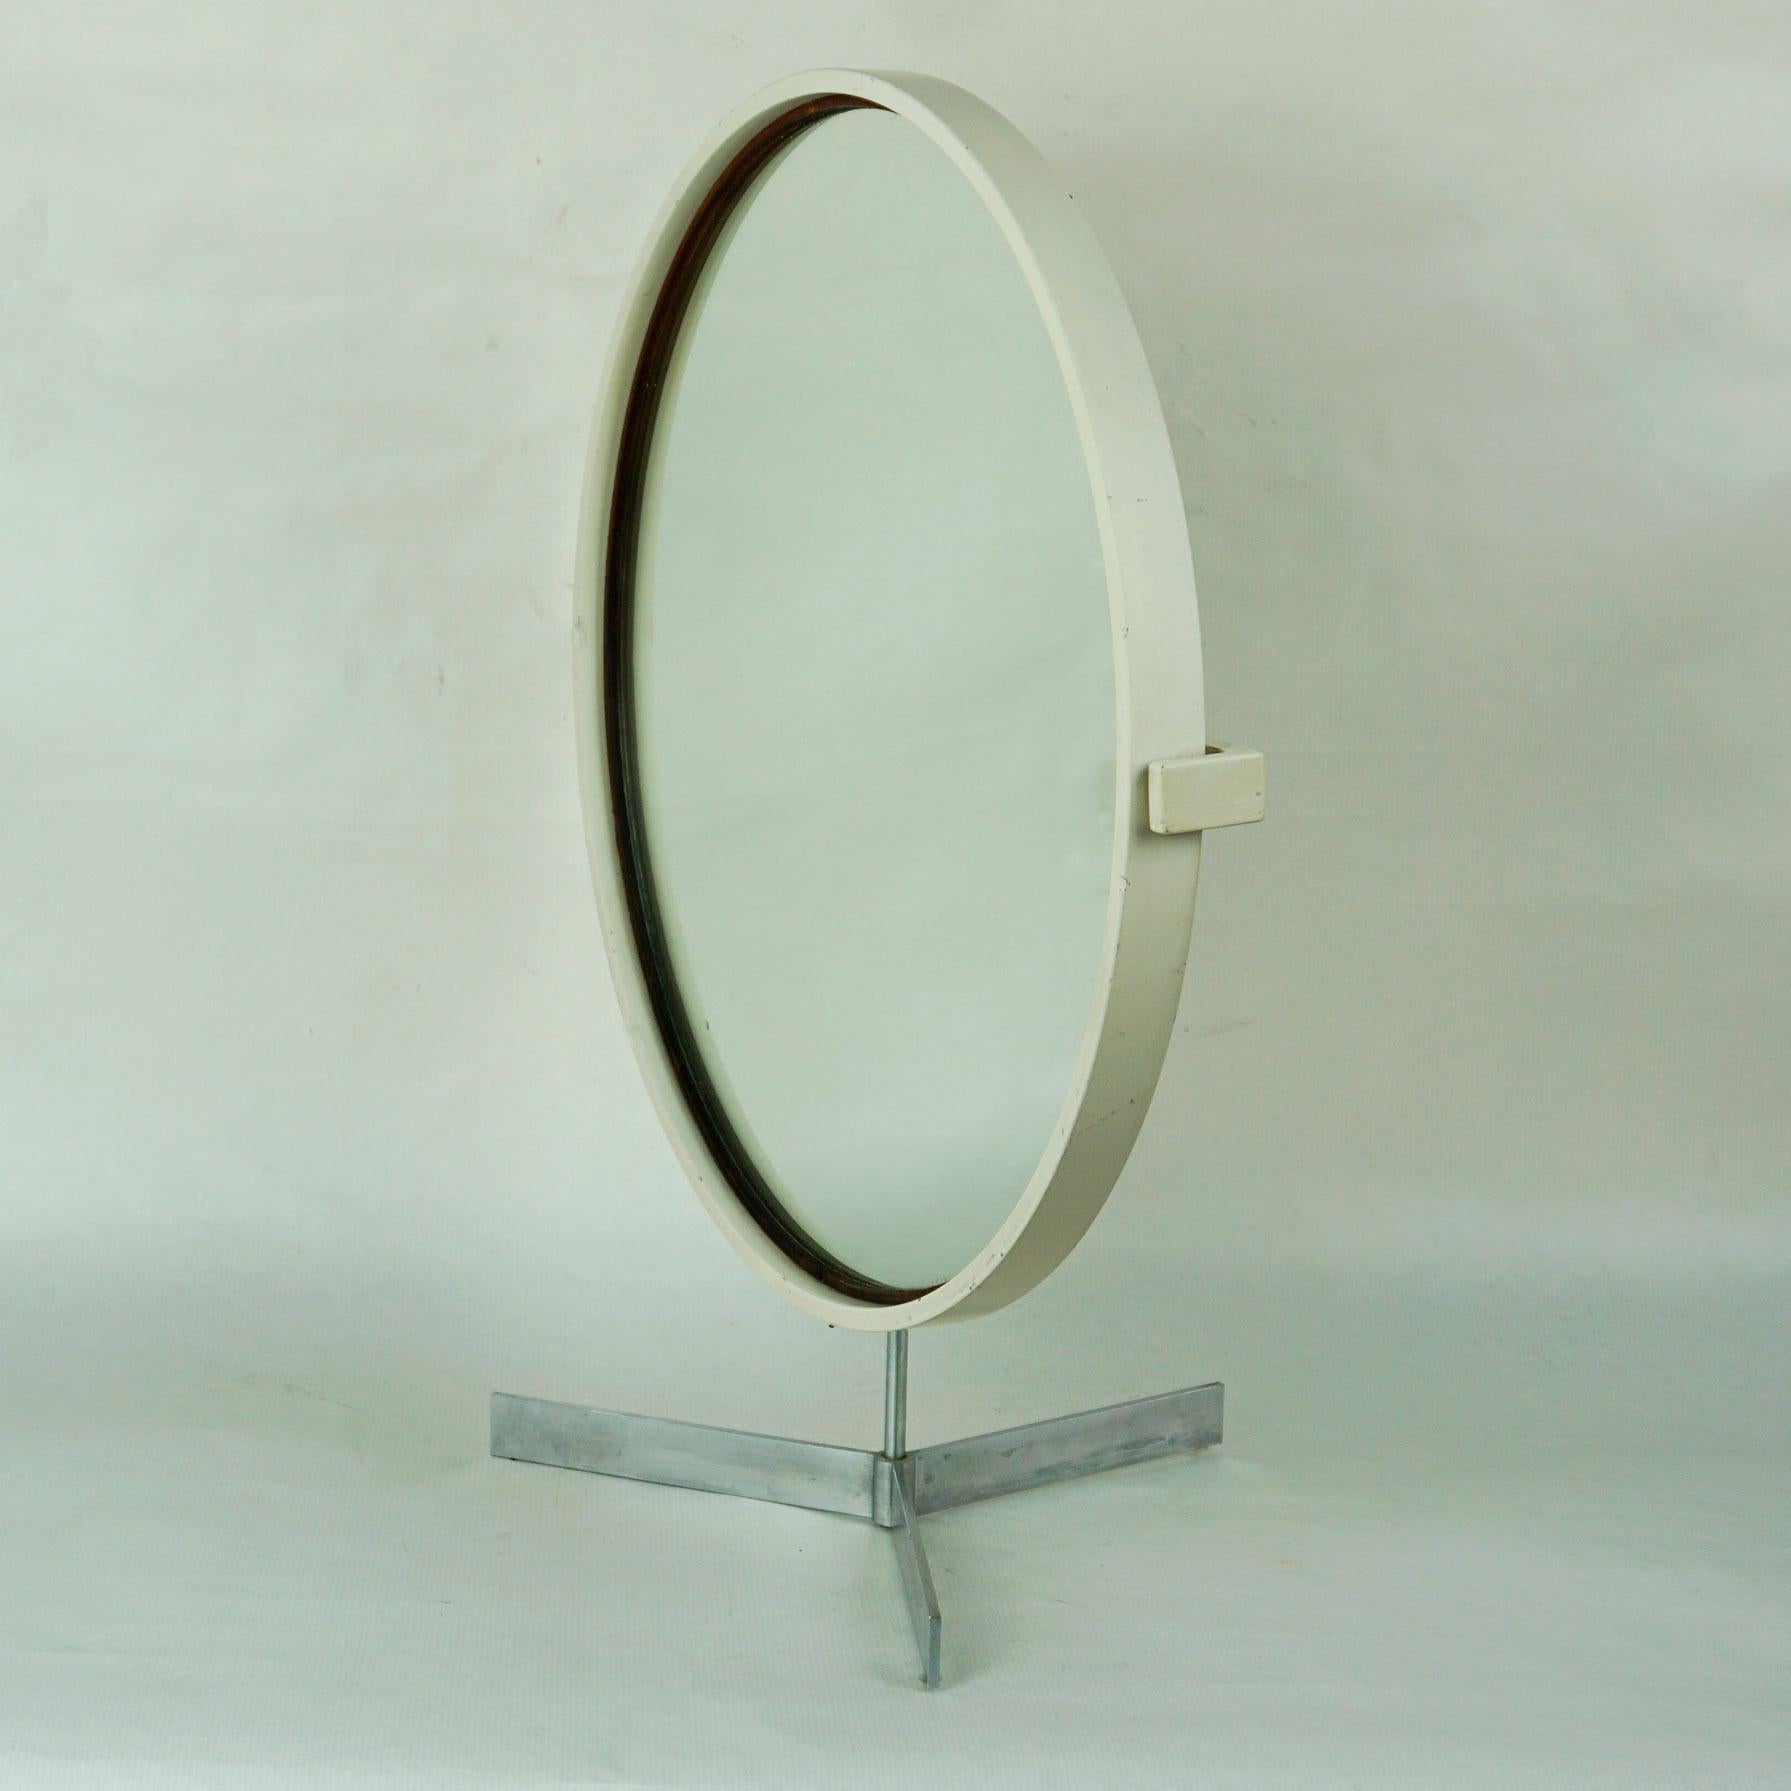 Amazing table mirror in white lacquered large version designed by Uno & Östen Kristiansson for LUXUS Sweden in the 1960s.
It features a Tripod stainless steel base with rotating wooden circular mirror. On the reverse it still has its original